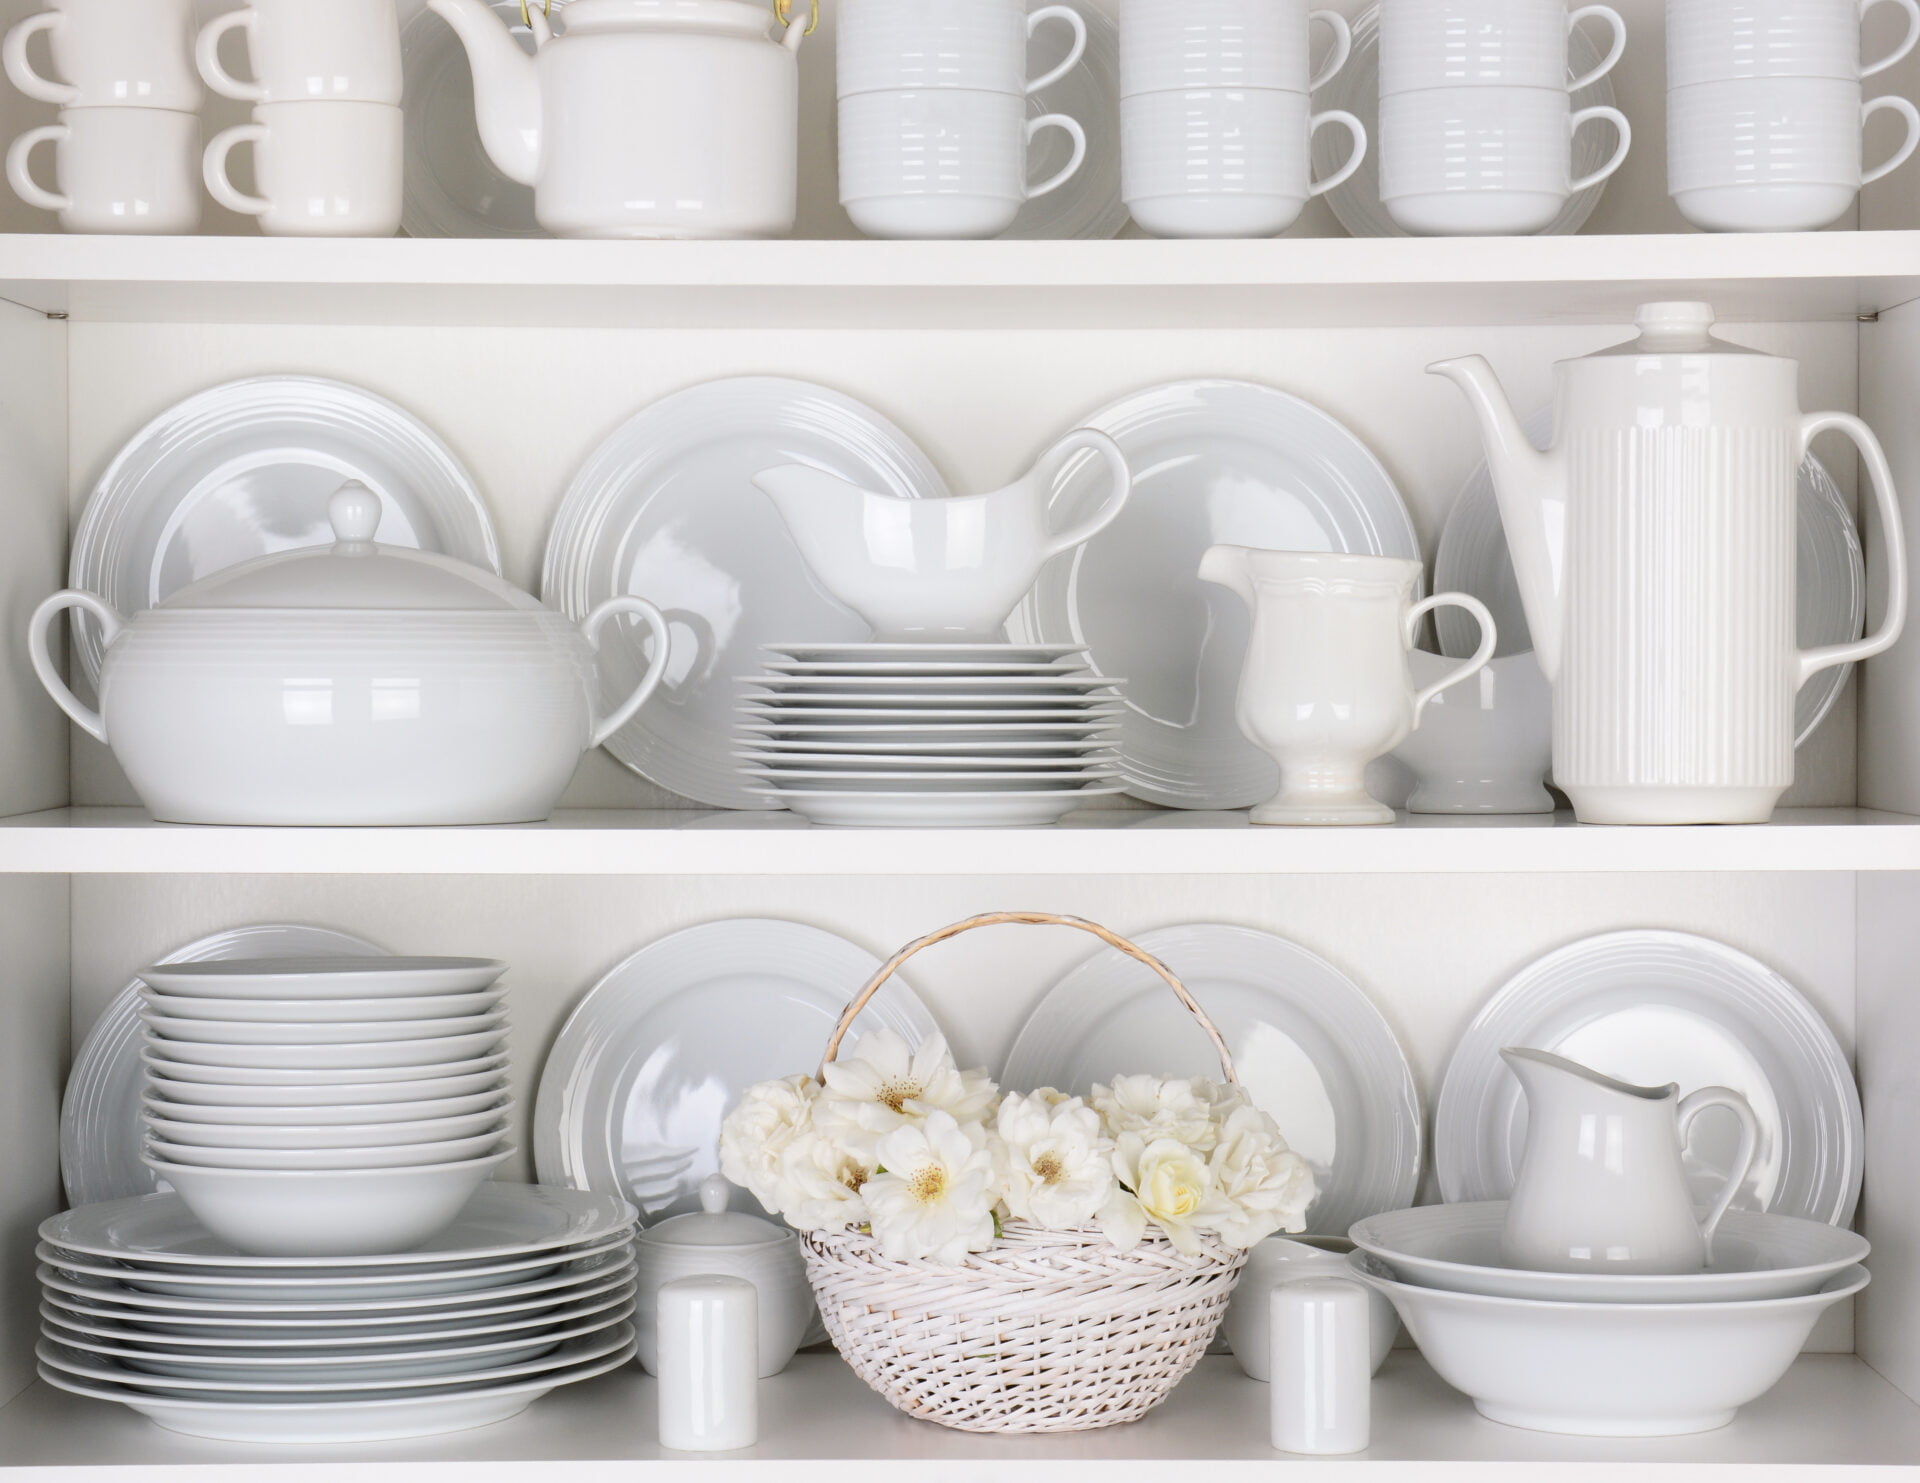 Closeup of white plates and dinnerware in a cupboard. A basket of white roses is centered on the bottom shelf. Items include, plates, coffee cups, saucers, soup tureen, tea pot, and gray boats